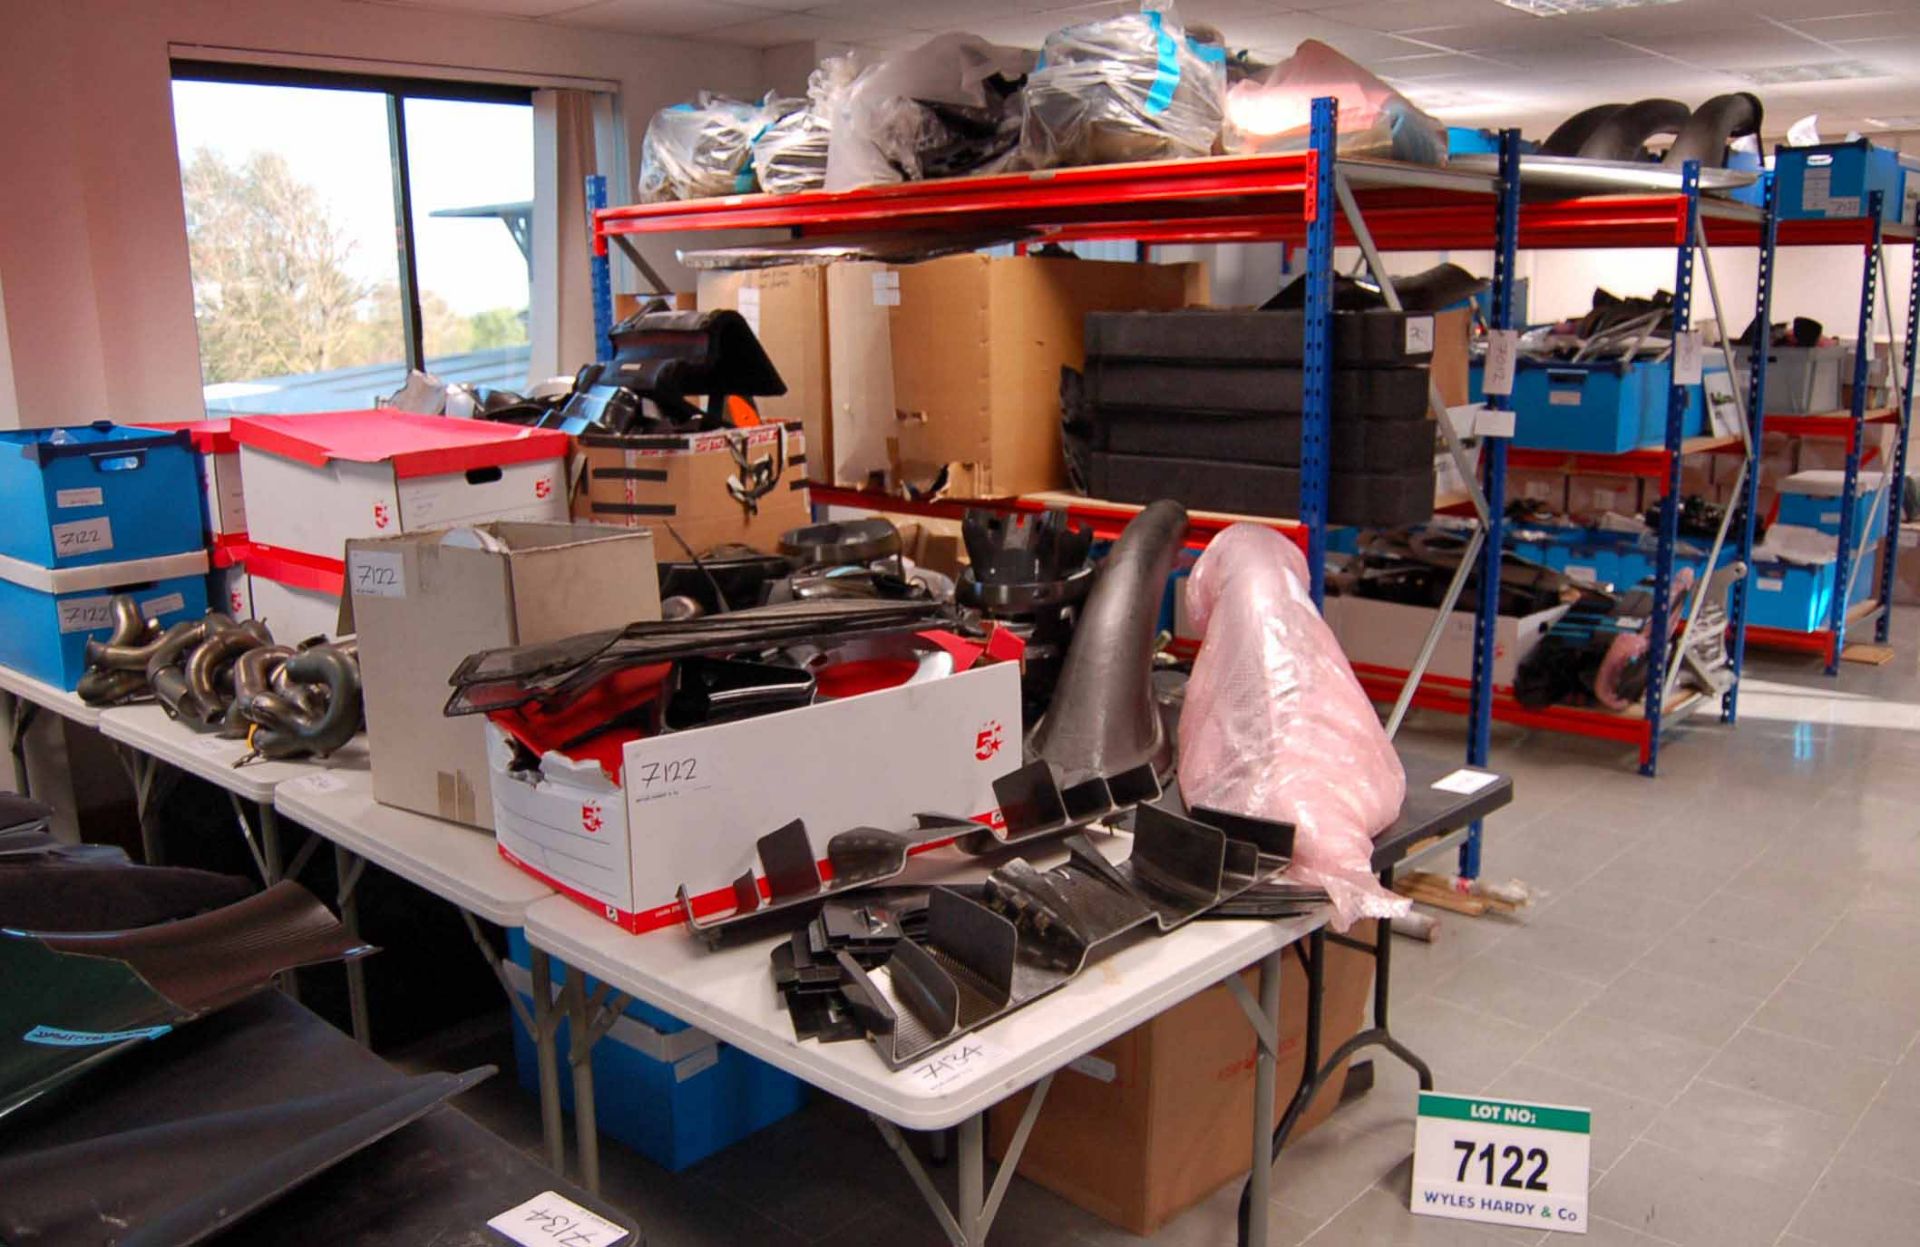 The Balance of the CATERHAM F1 2013 Racing Team Car Parts Archive held on Three Runs of Racking (